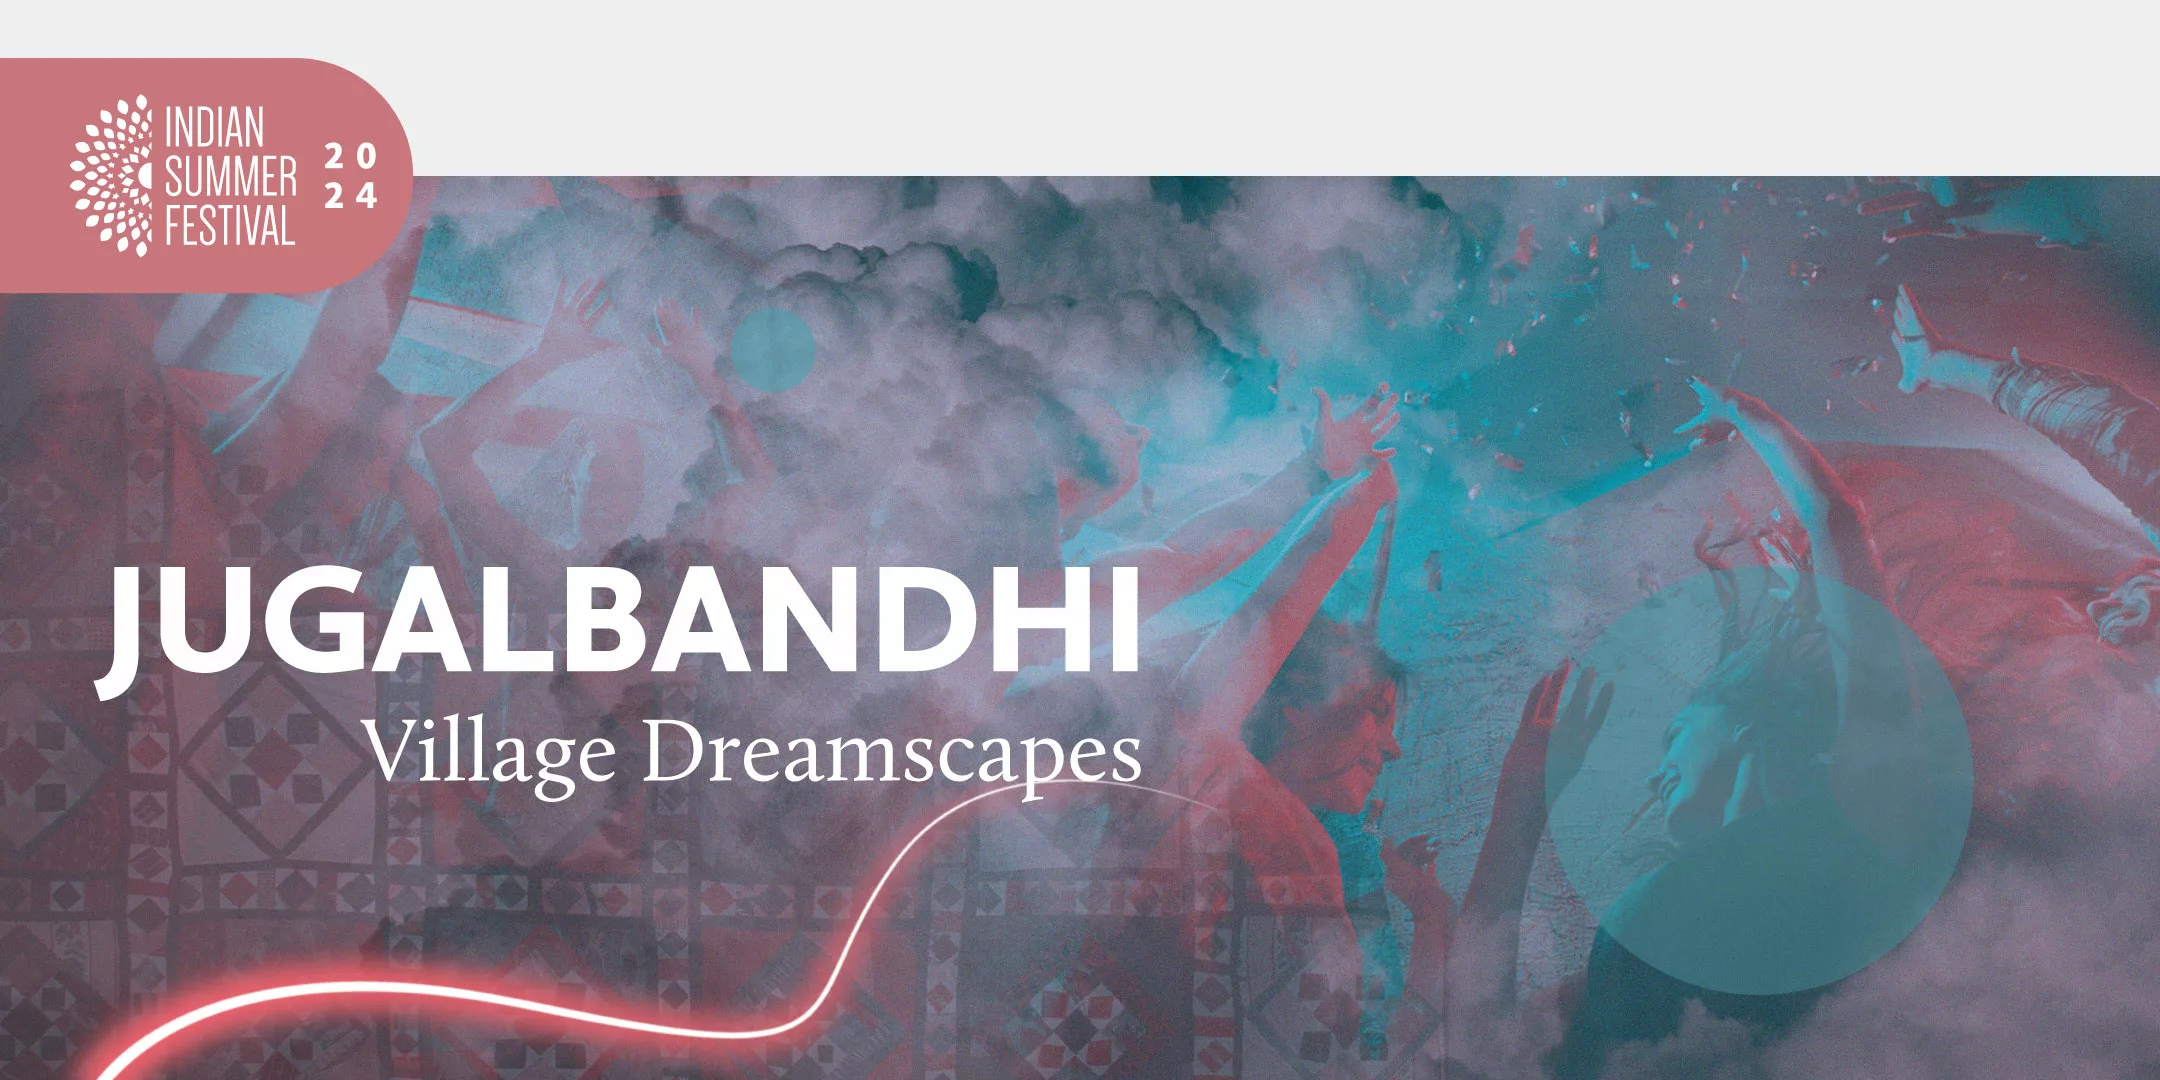 The image features an abstract and vibrant background with predominantly red and teal overlays. On the left, there is a dancing crowd, a tapestry, and cloud-like formations, and a bright red, curved streak of neon light across the bottom edge. The words "Jugalbandhi Village Dreamscapes" is in bold white text and on the right, the image is overlayed with translucent teal circles and confetti.